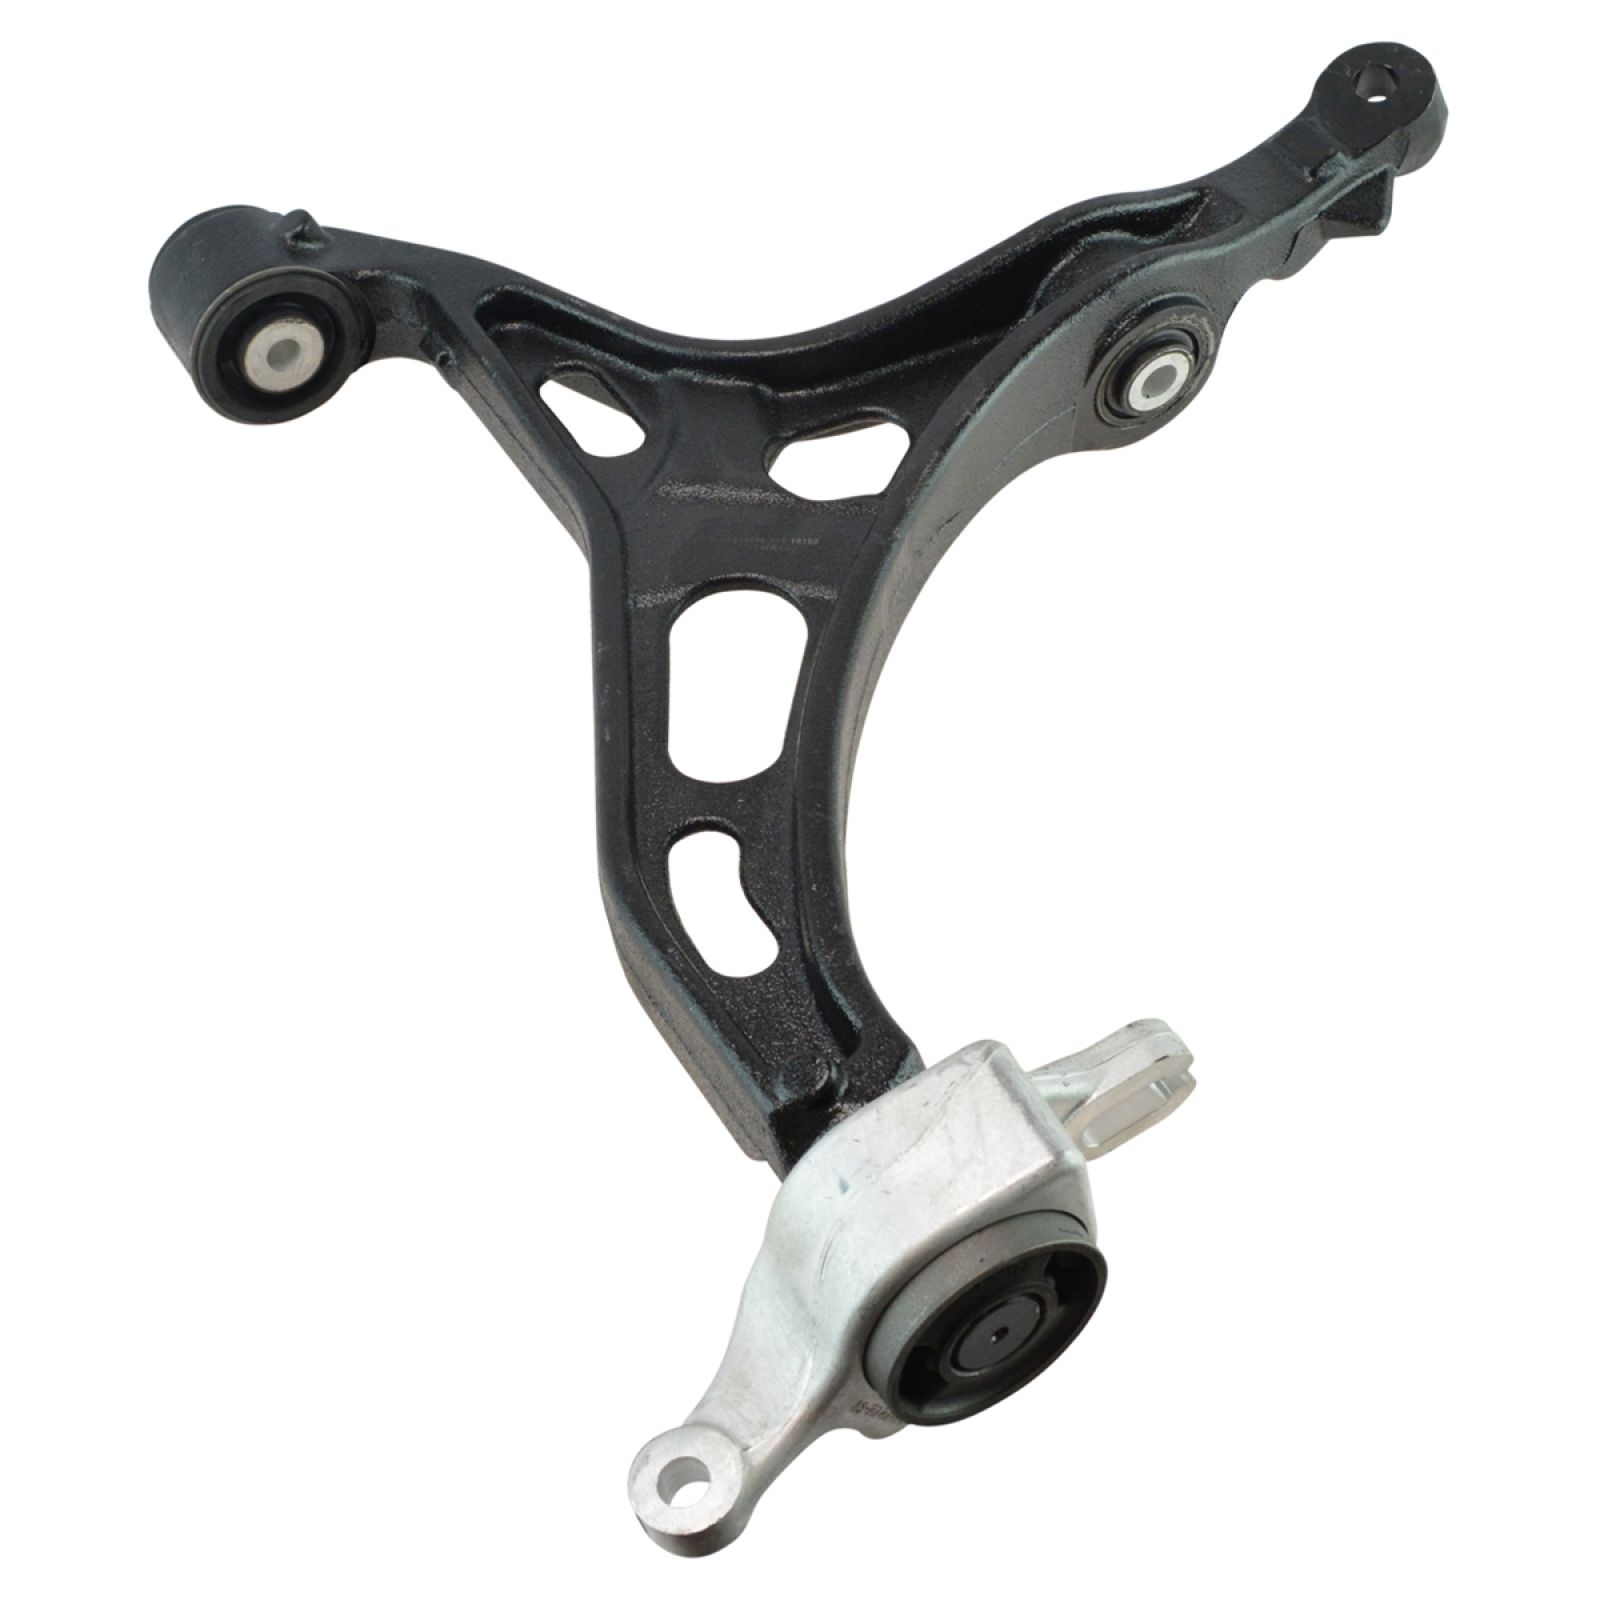 Trq Control Arm For 11-15 Grand Cherokee Front Passenger Side, Suspension Parts, HWNV-PSA63867